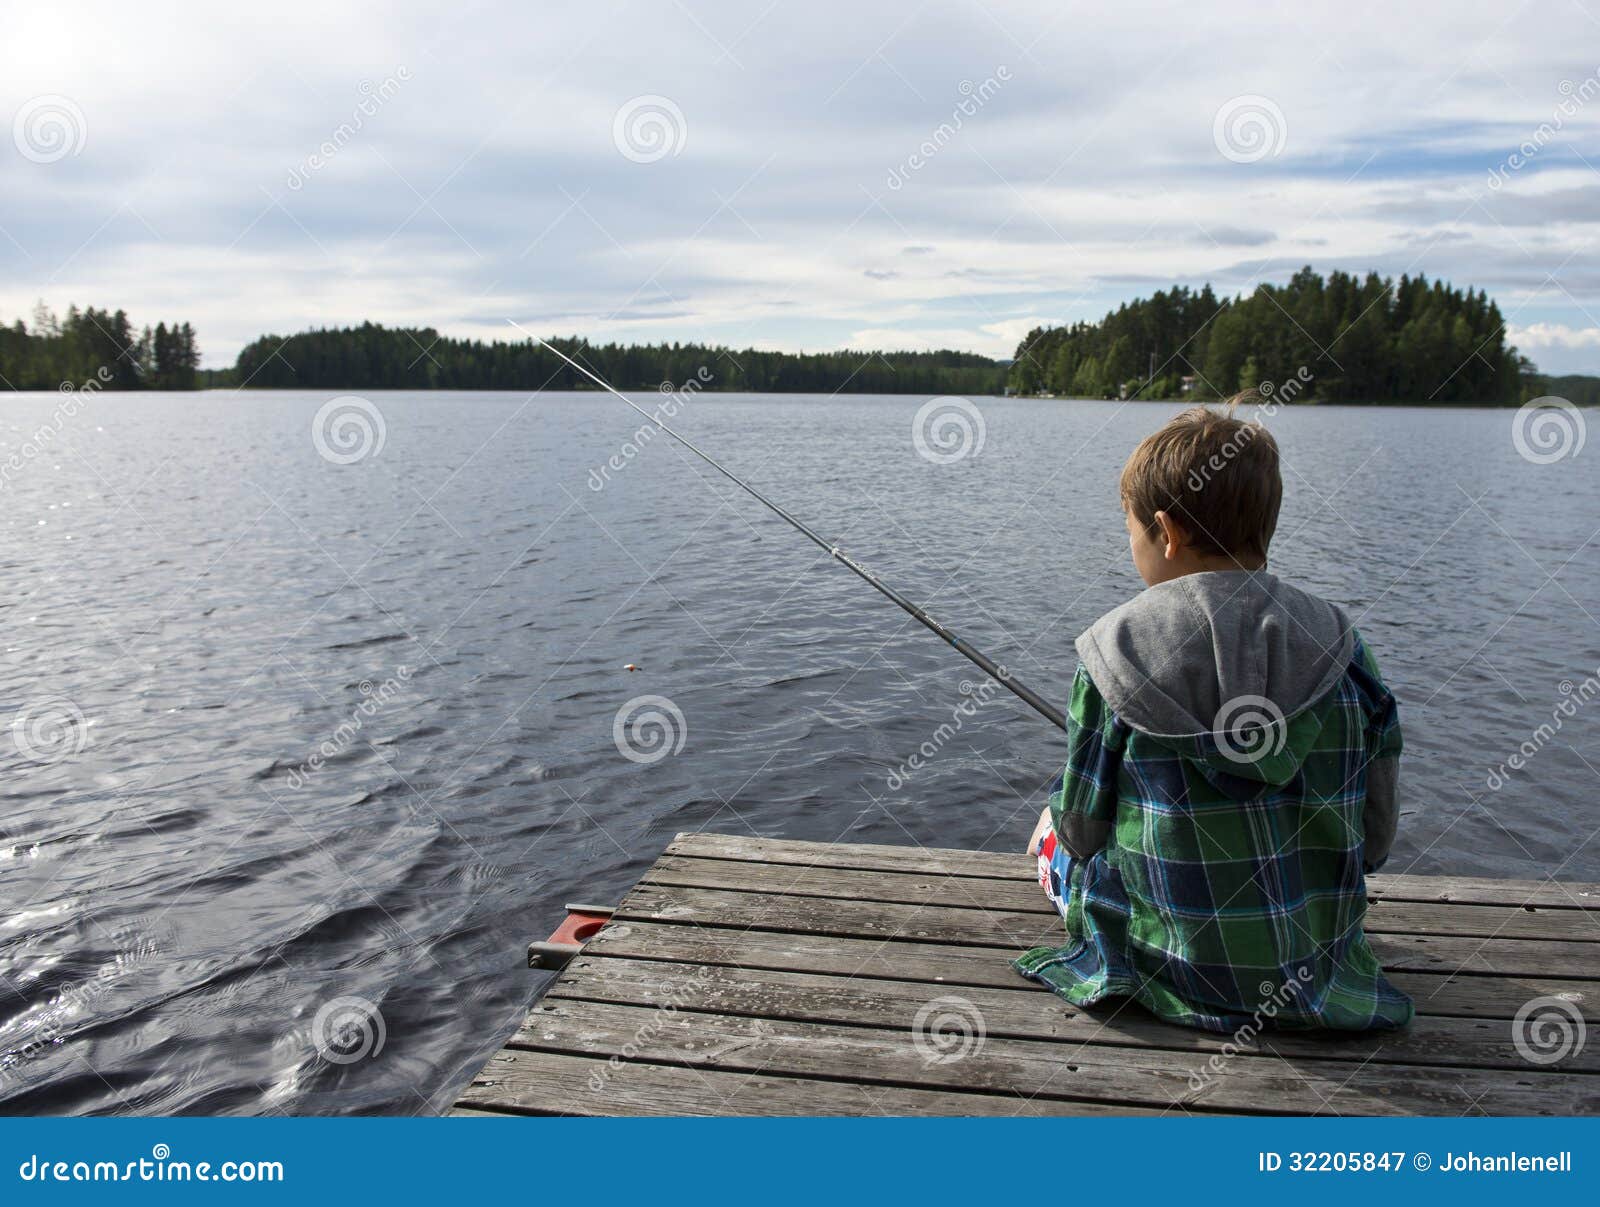 young boy angling